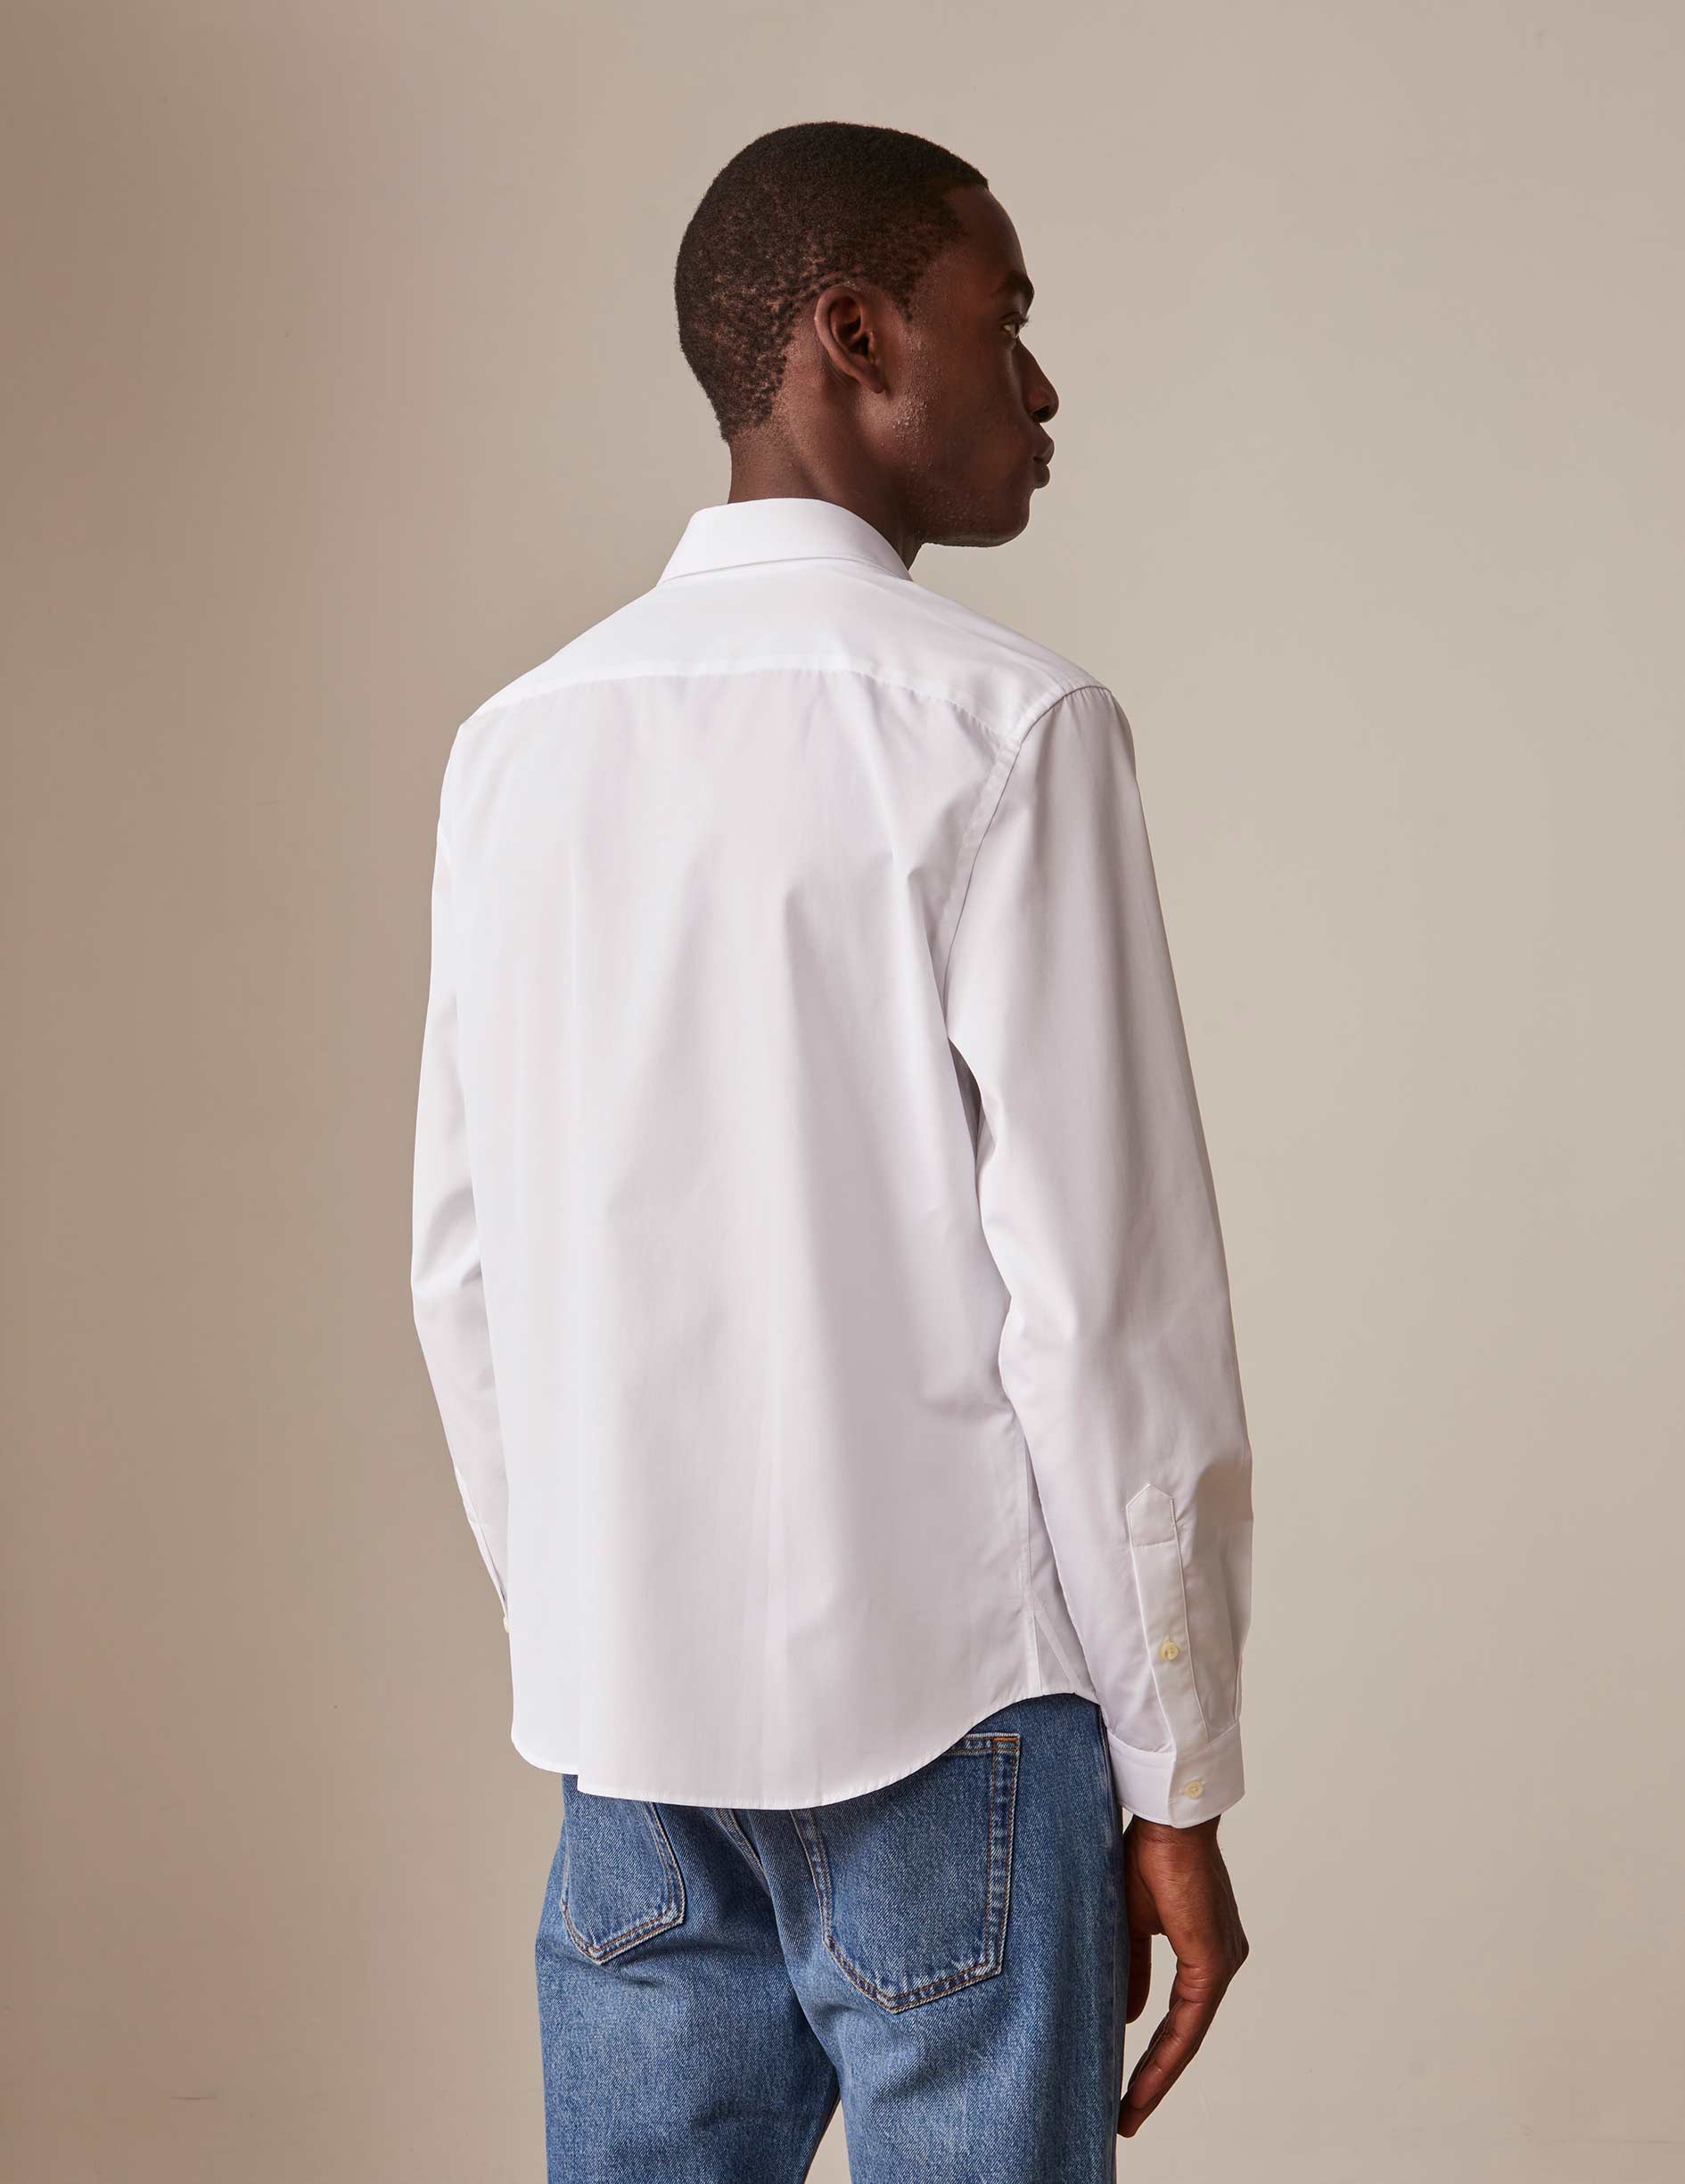 White "Je t'aime" shirt with red embroidery - Poplin - Figaret Collar